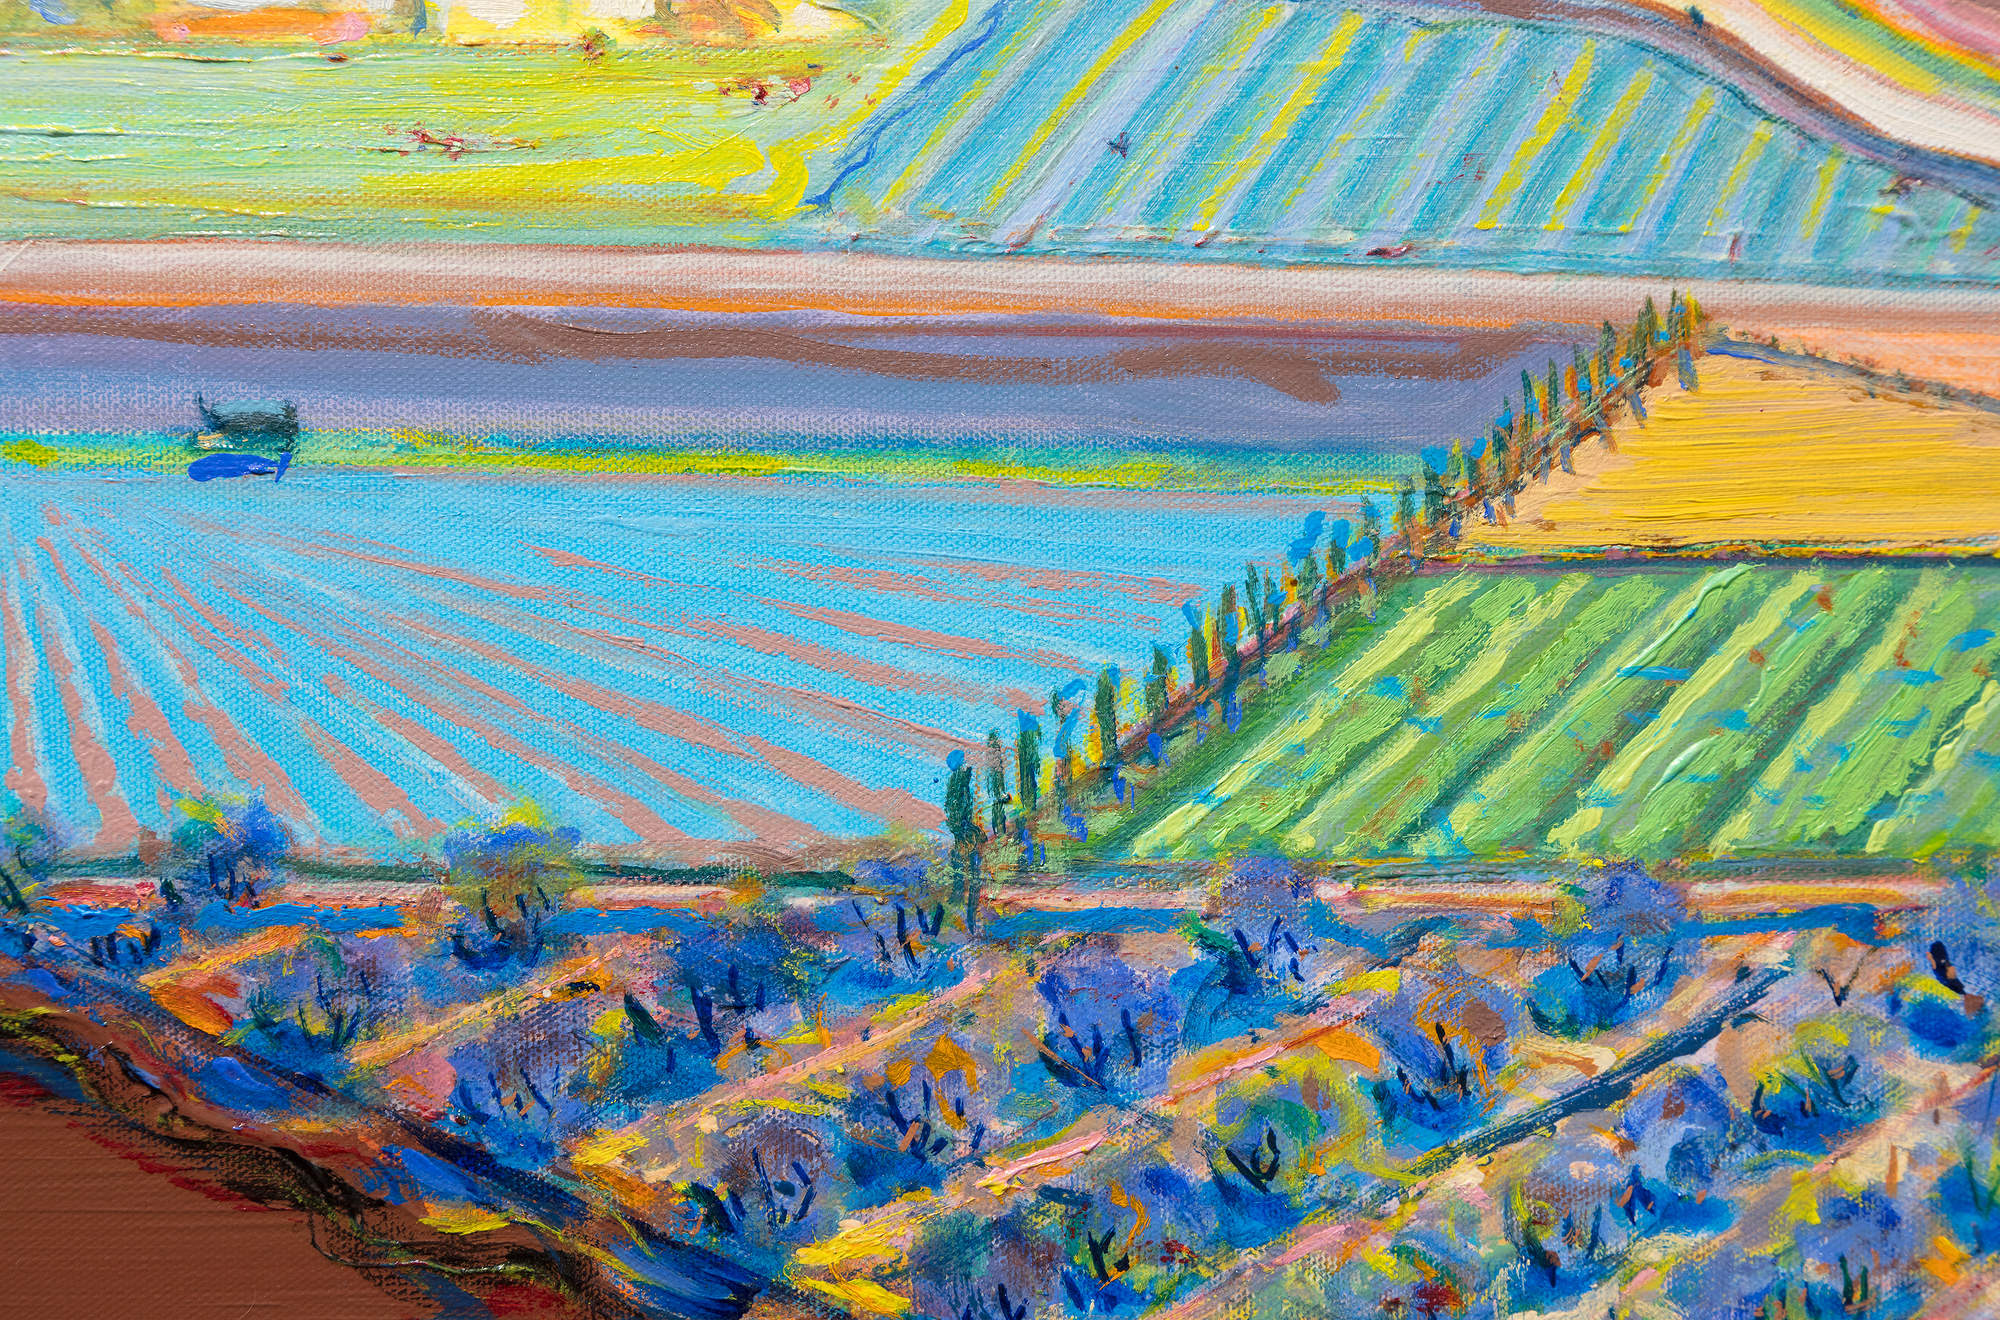 When forty rural Sacramento Delta landscapes by Wayne Thiebaud were unveiled at a San Francisco gallery opening in November 1997, attendees were amazed by paintings they never anticipated. This new frontier betrayed neither Thiebaud’s mastery of confectionary-shop colors nor his impeccable eye for formal relationships. Rather, his admirers were shocked to learn that all but seven of these forty interpretations had been completed in just two years. As his son Paul recalled, “the refinements of my father’s artistic process were ever changing in a chameleon-like frenzy.” The new direction had proved an exhilarating experience, each painting an affirmation of Wayne Thiebaud’s impassioned response to the fields and levees of the local environment he dearly loved. &lt;br&gt;&lt;br&gt;Viewed from the perspective of a bird or a plane, The Riverhouse is an agrarian tapestry conceived with a kaleidoscopic range of shapes and simple forms; fields striped with furrows or striated fans, deliriously colored parallelograms and trapezoids, an orchard garnished pizza-shaped wedge, and a boldly limned river, the lifeline of a thirsty California central valley largely dependent upon transported water.&lt;br&gt;&lt;br&gt;The Riverhouse is a painting that ‘moves’ between seamlessly shifting planes of aerial mapping that recalls Richard Diebenkorn’s stroke of insight when he took his first commercial flight the spring of 1951, and those partitions engaging a more standard vanishing point perspective. Thiebaud explained his process as “orchestrating with as much variety and tempo as I can.” Brightly lit with a fauve-like intensity, The Riverhouse is a heady concoction of vibrant pigment and rich impasto; one that recalls his indebtedness to Pierre Bonnard whose color Thiebaud referred to as “a bucket full of hot coals and ice cubes.” Among his many other influences, the insertion of objects — often tiny — that defy a rational sense of scale that reflects his interest in Chinese landscape painting.&lt;br&gt;&lt;br&gt;As always, his mastery as a painter recalls his titular pies and cakes with their bewitching rainbow-like halos and side-by-side colors of equal intensity but differing in hues to create the vibratory effect of an aura, what Thiebaud explained “denotes an attempt to develop as much energy and light and visual power as you can.” Thiebaud’s Sacramento Delta landscapes are an integral and important part of his oeuvre. Paintings such as The Riverhouse rival the best abstract art of the twentieth century. His good friend, Willem de Kooning thought so, too.